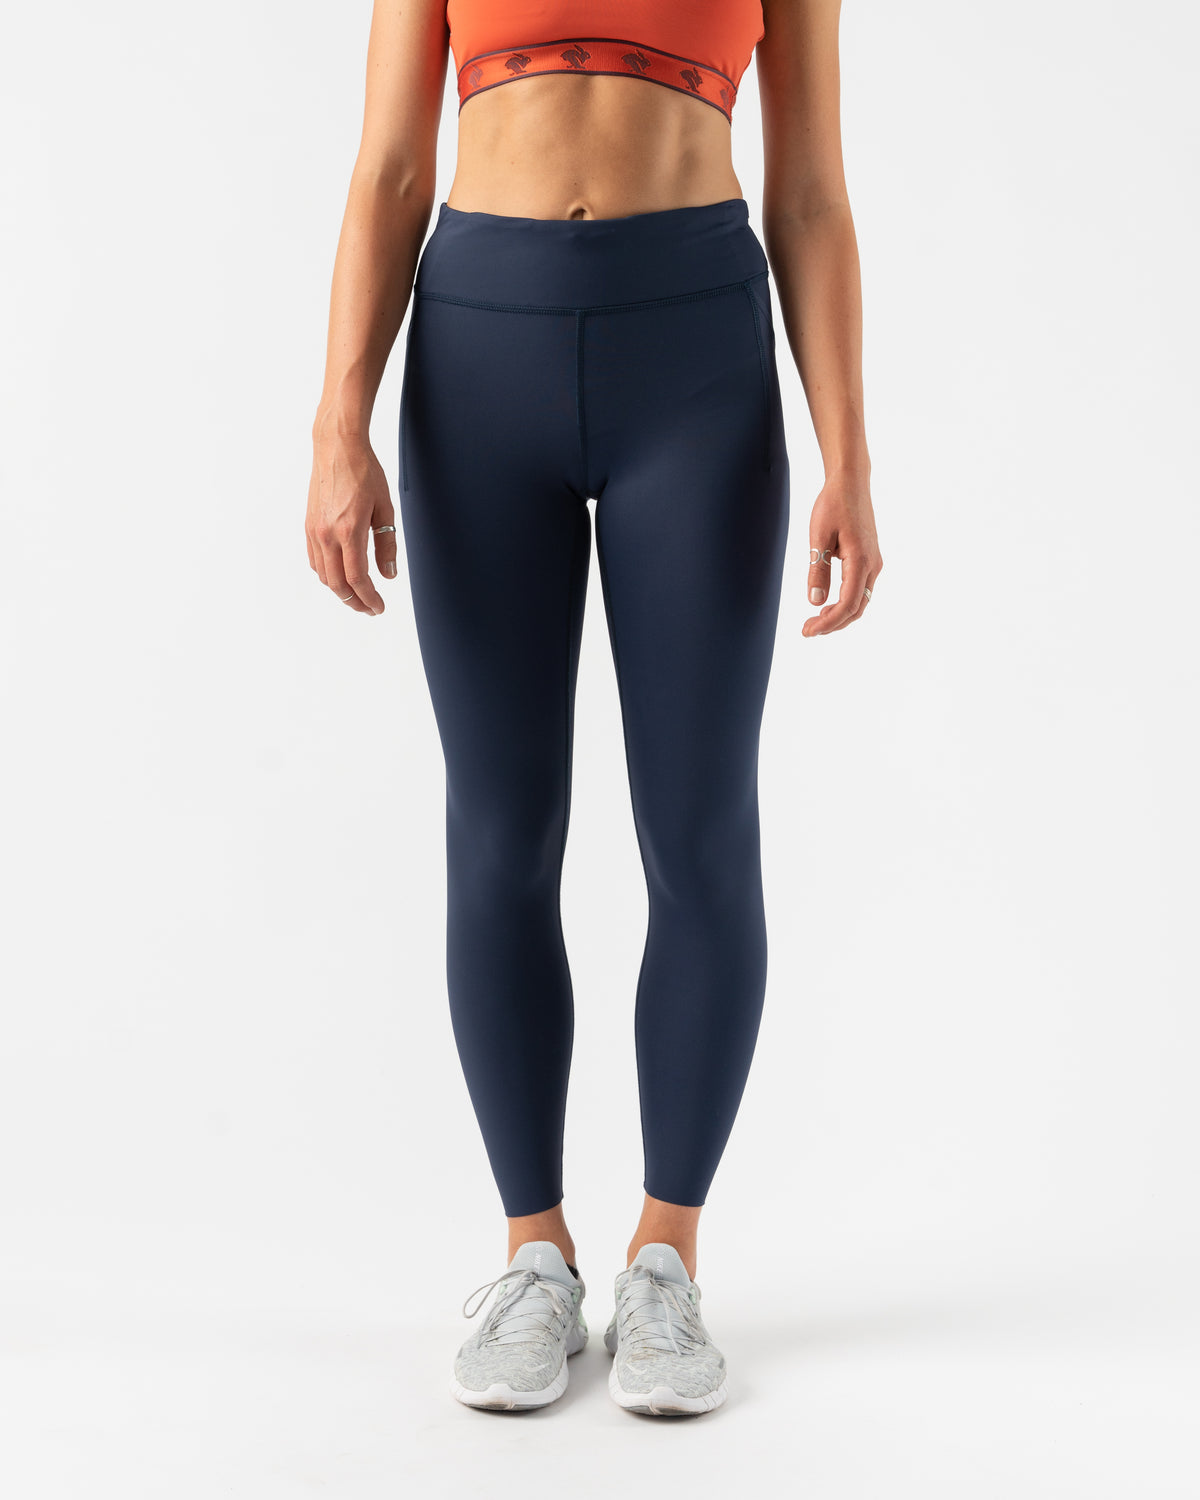 VXS pants XS  Running tights women, Sports wear outfits, Pants